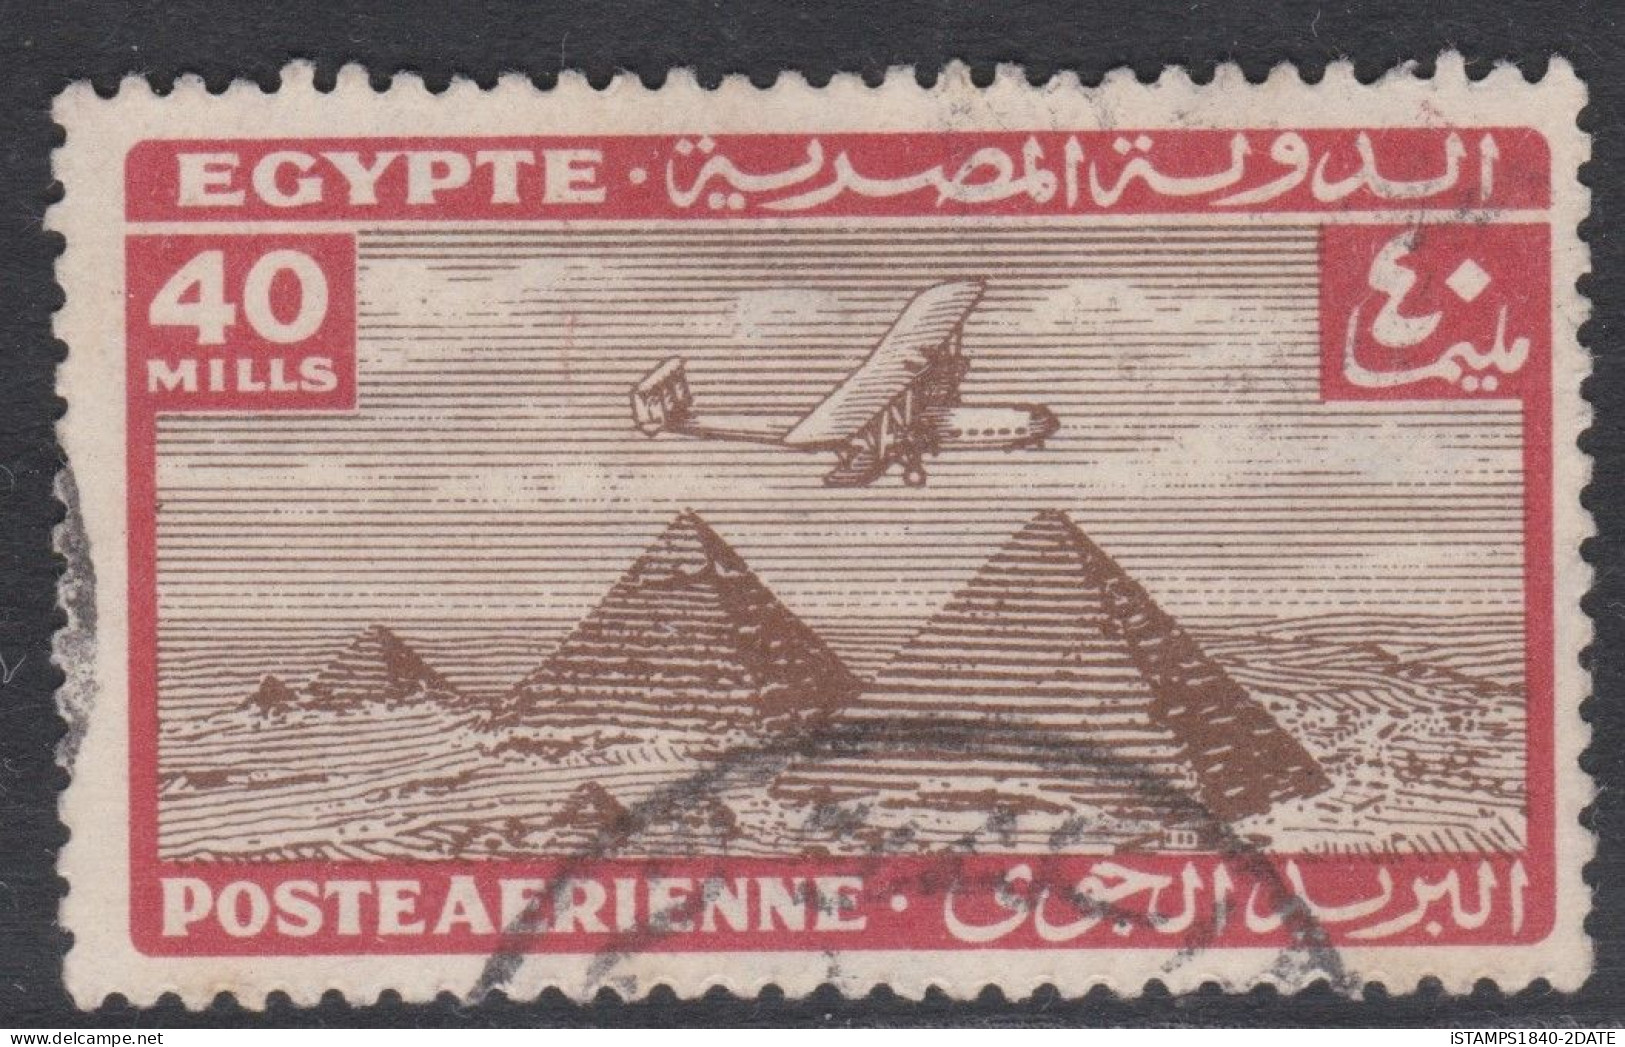 00679/ Egypt 1934/38 Air Mail 40m Used Plane Over Pyramid - Airmail